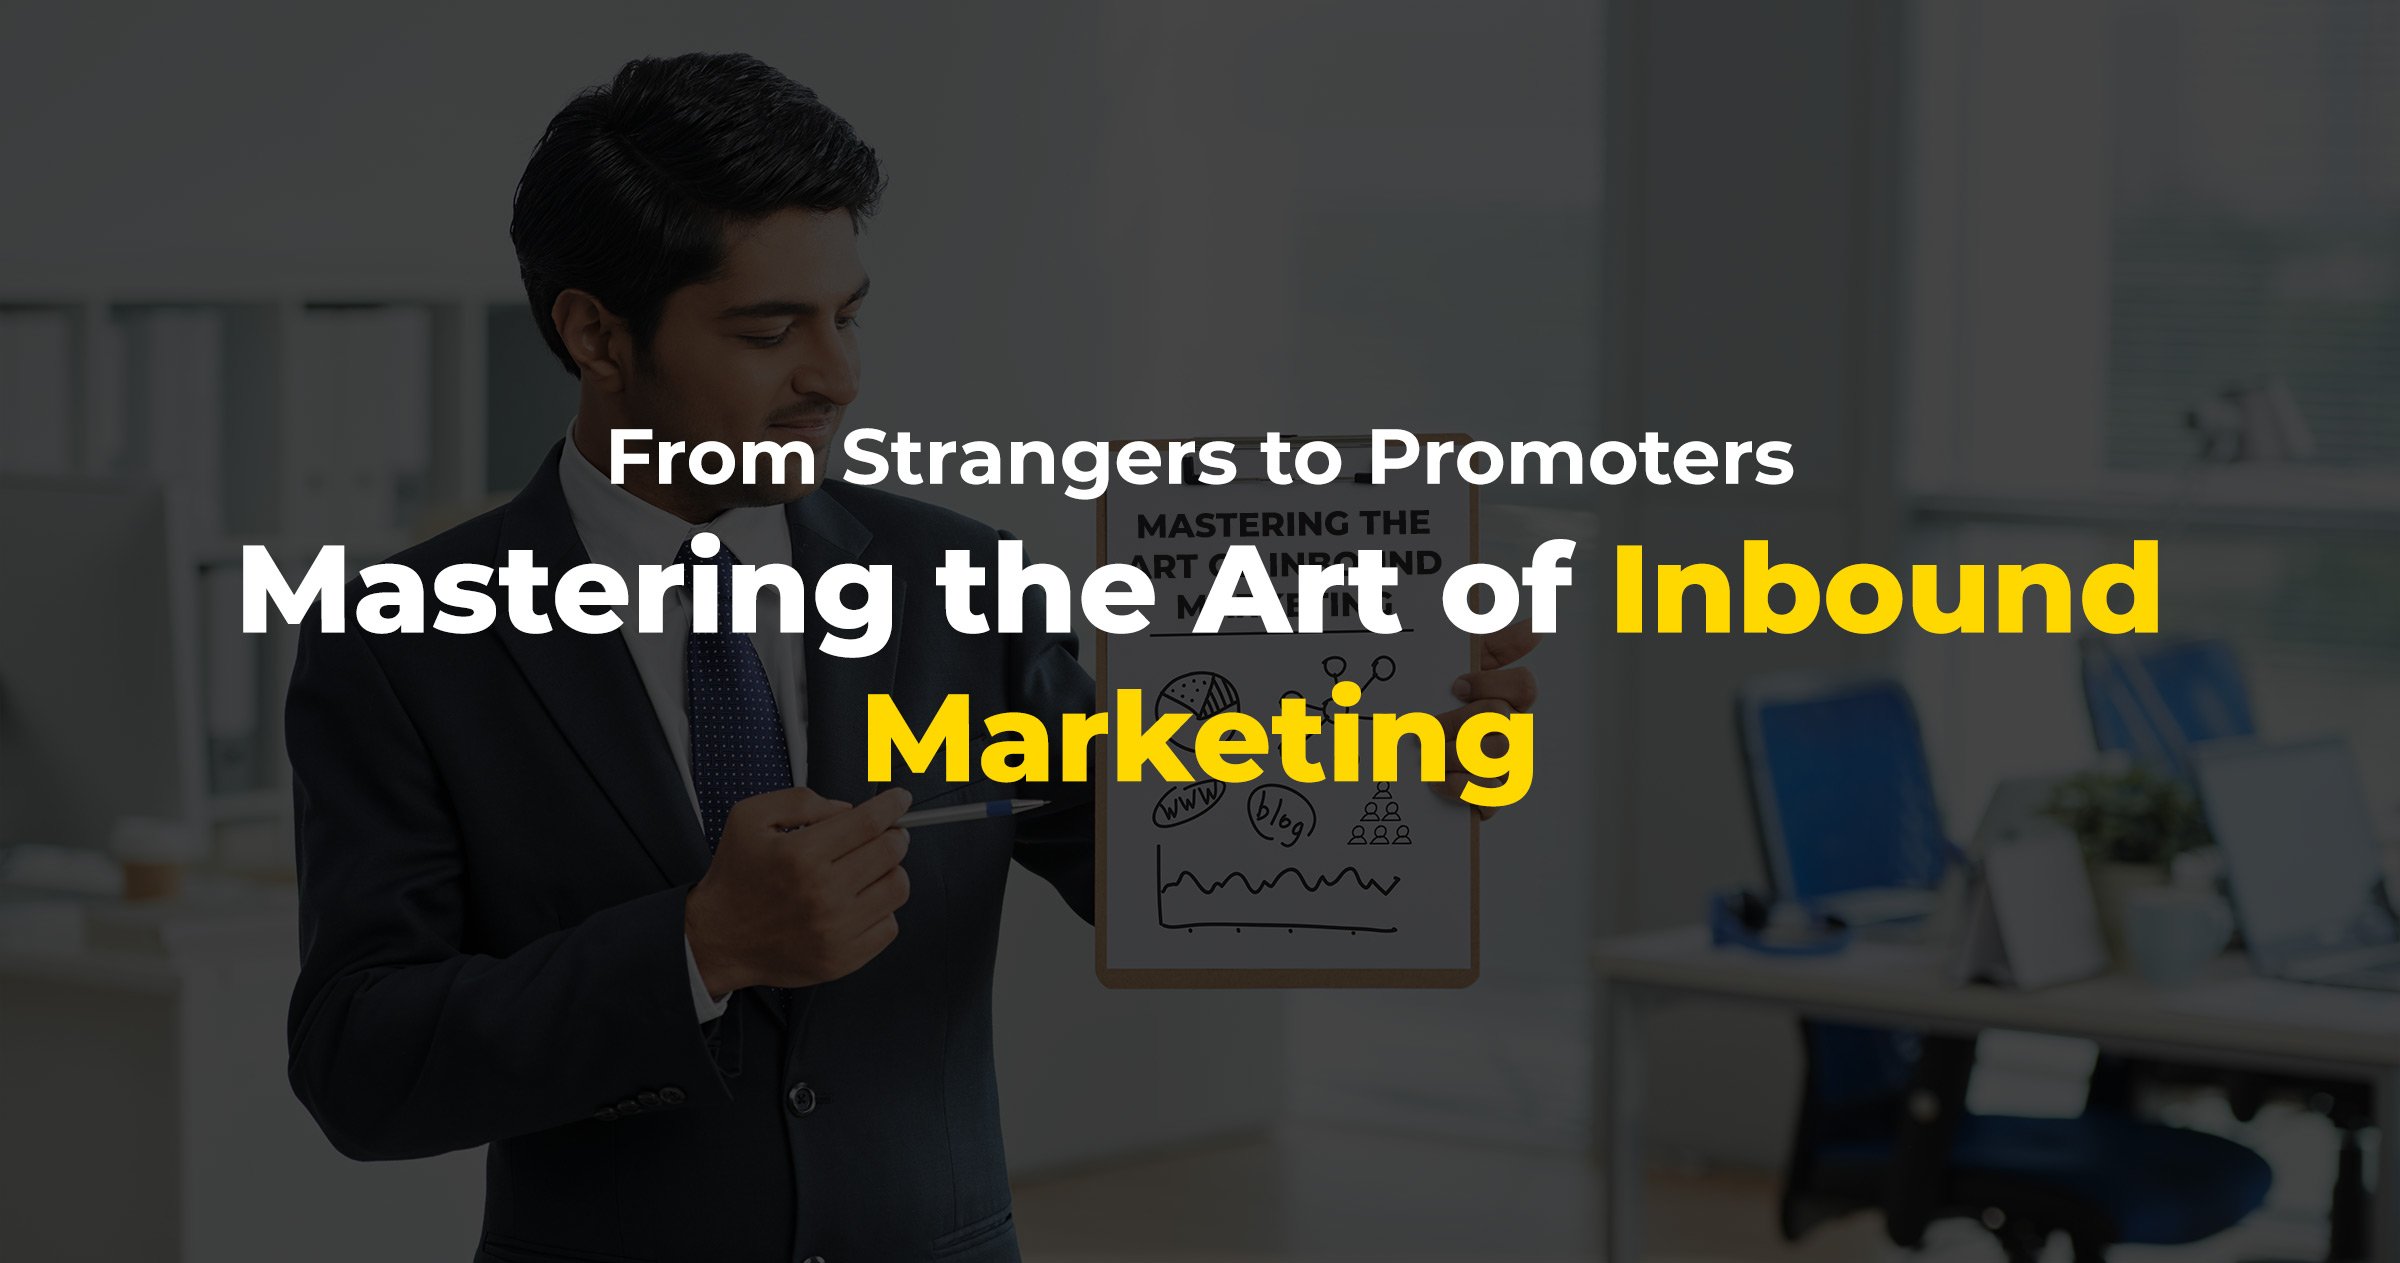 From Strangers to Promoters: Mastering the Art of Inbound Marketing